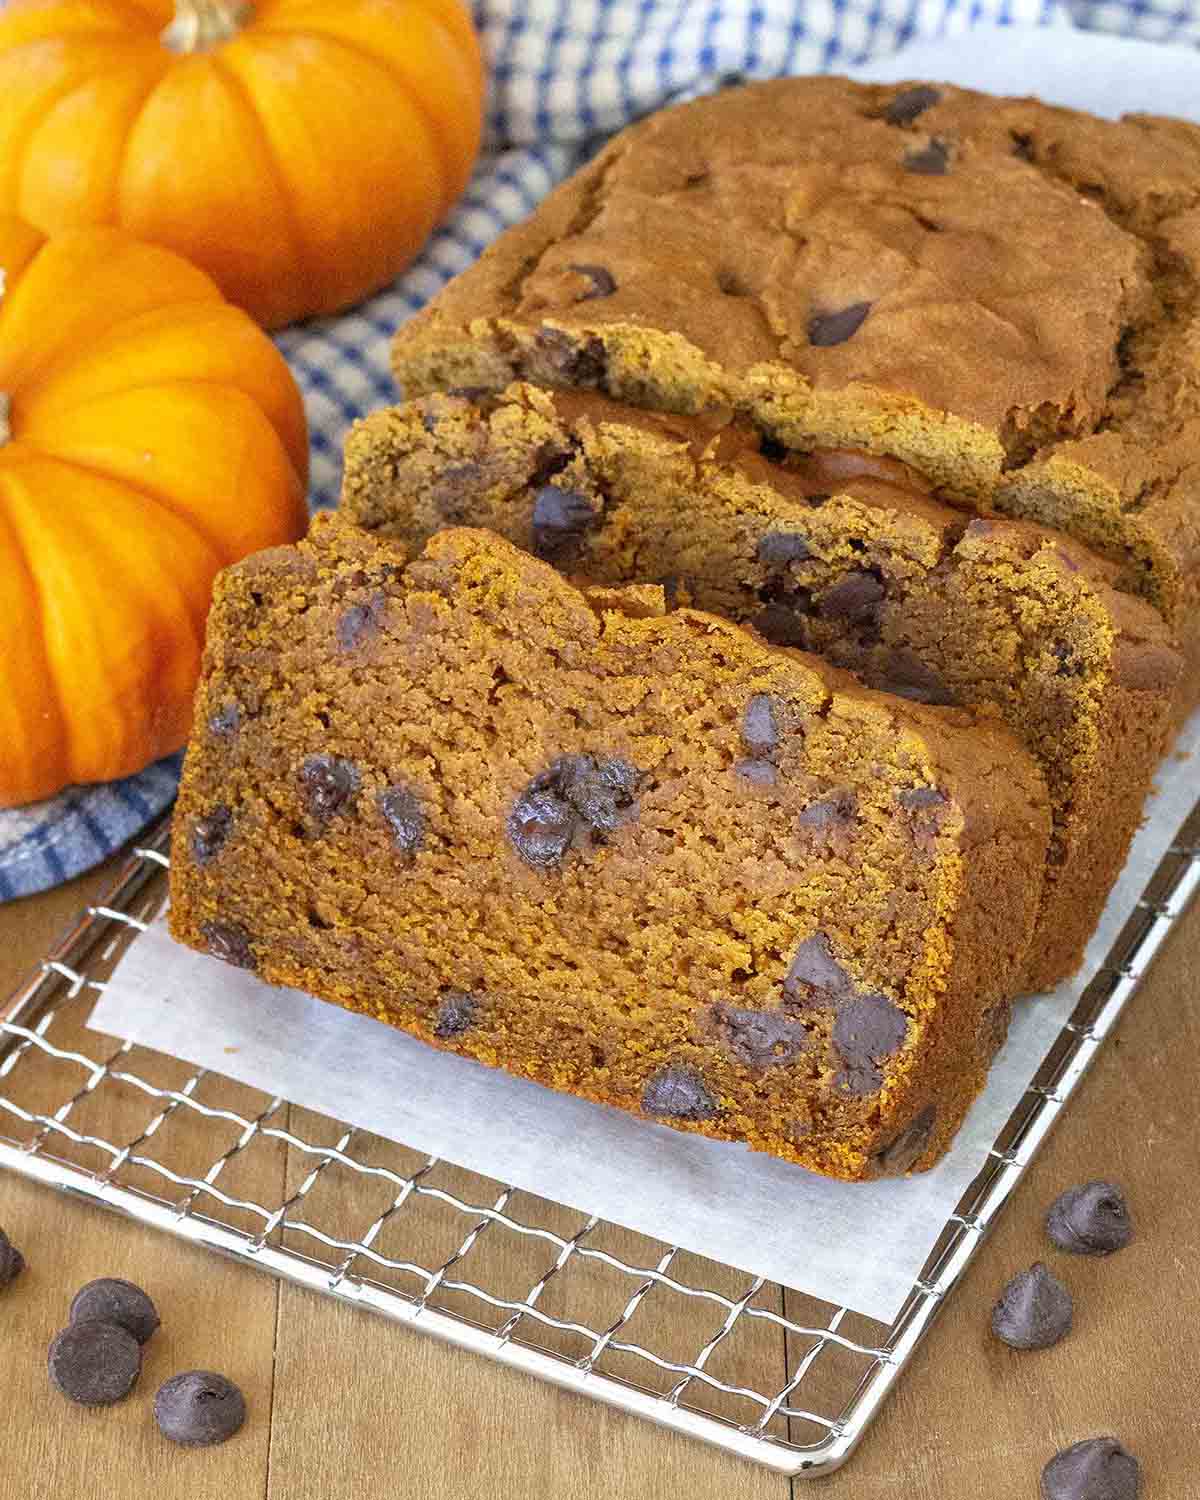 A loaf of pumpkin bread on a small cooling rack, two pieces have been sliced and sit in front of the loaf.